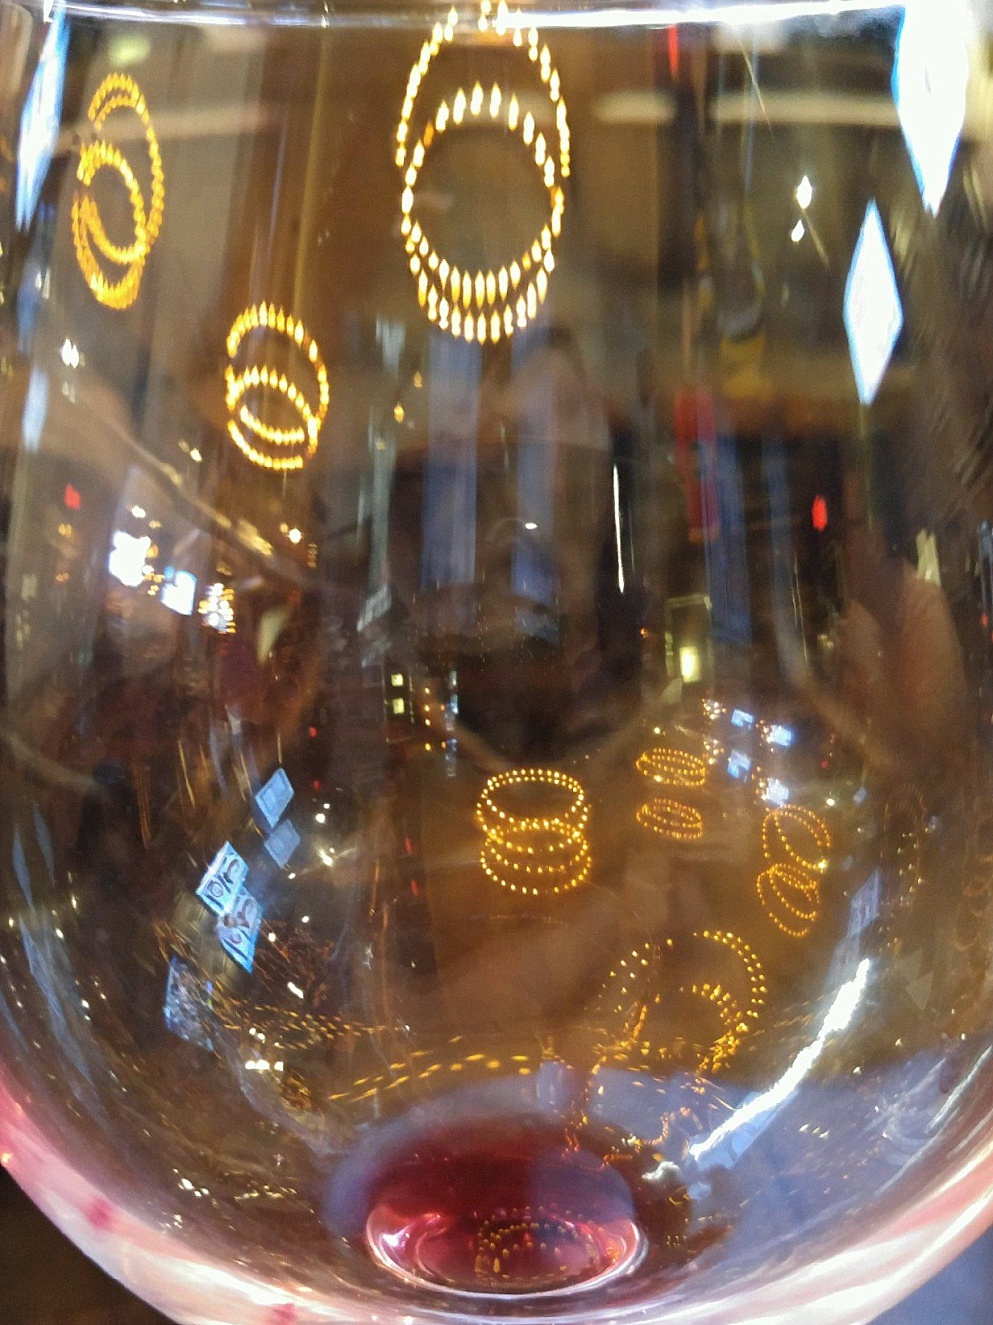 Reflections in an empty wineglass